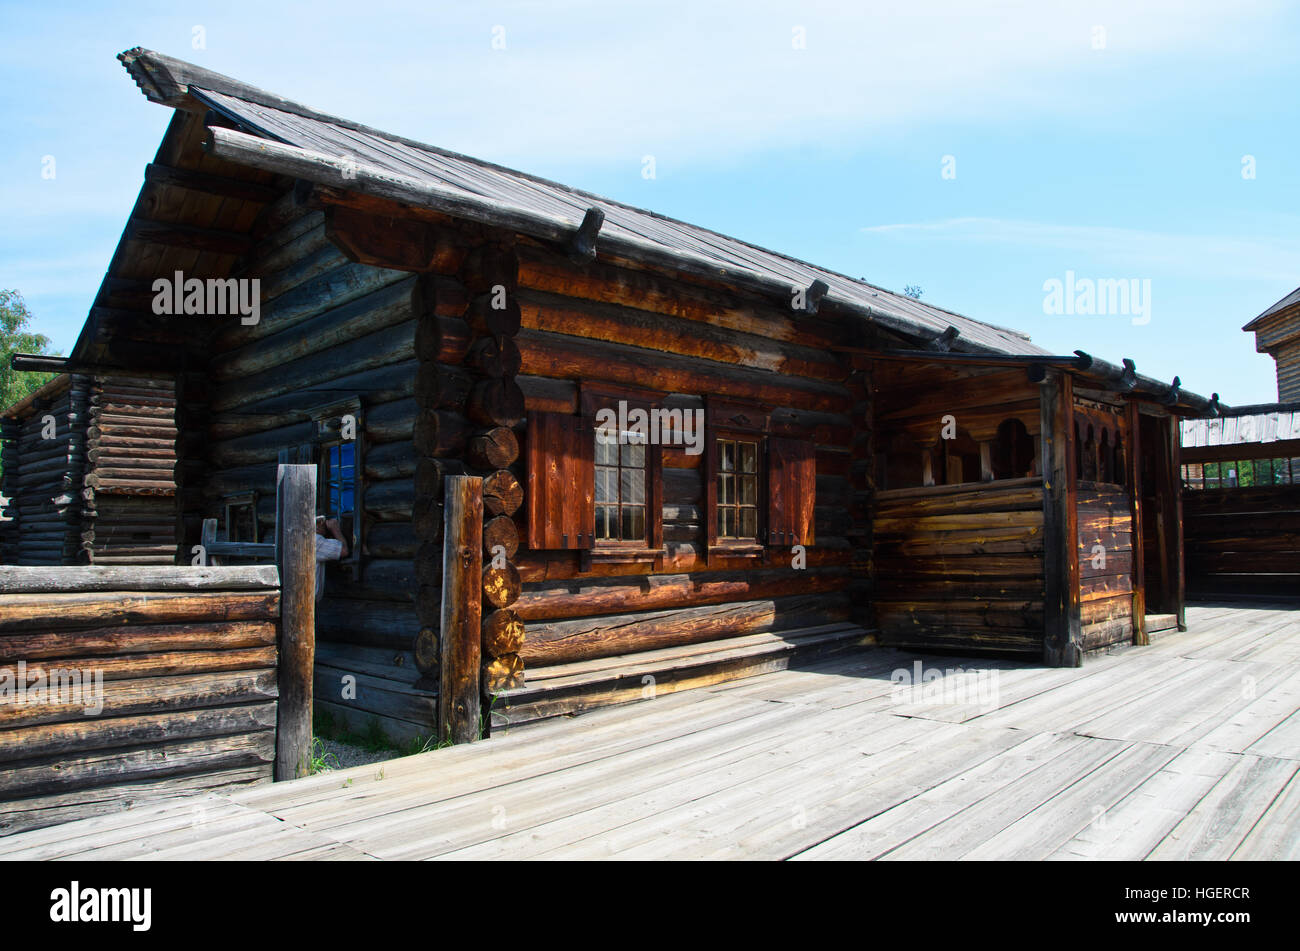 Taltsy Museum f Wooden Architectural and Ethonography near Irkutsk town. Stock Photo